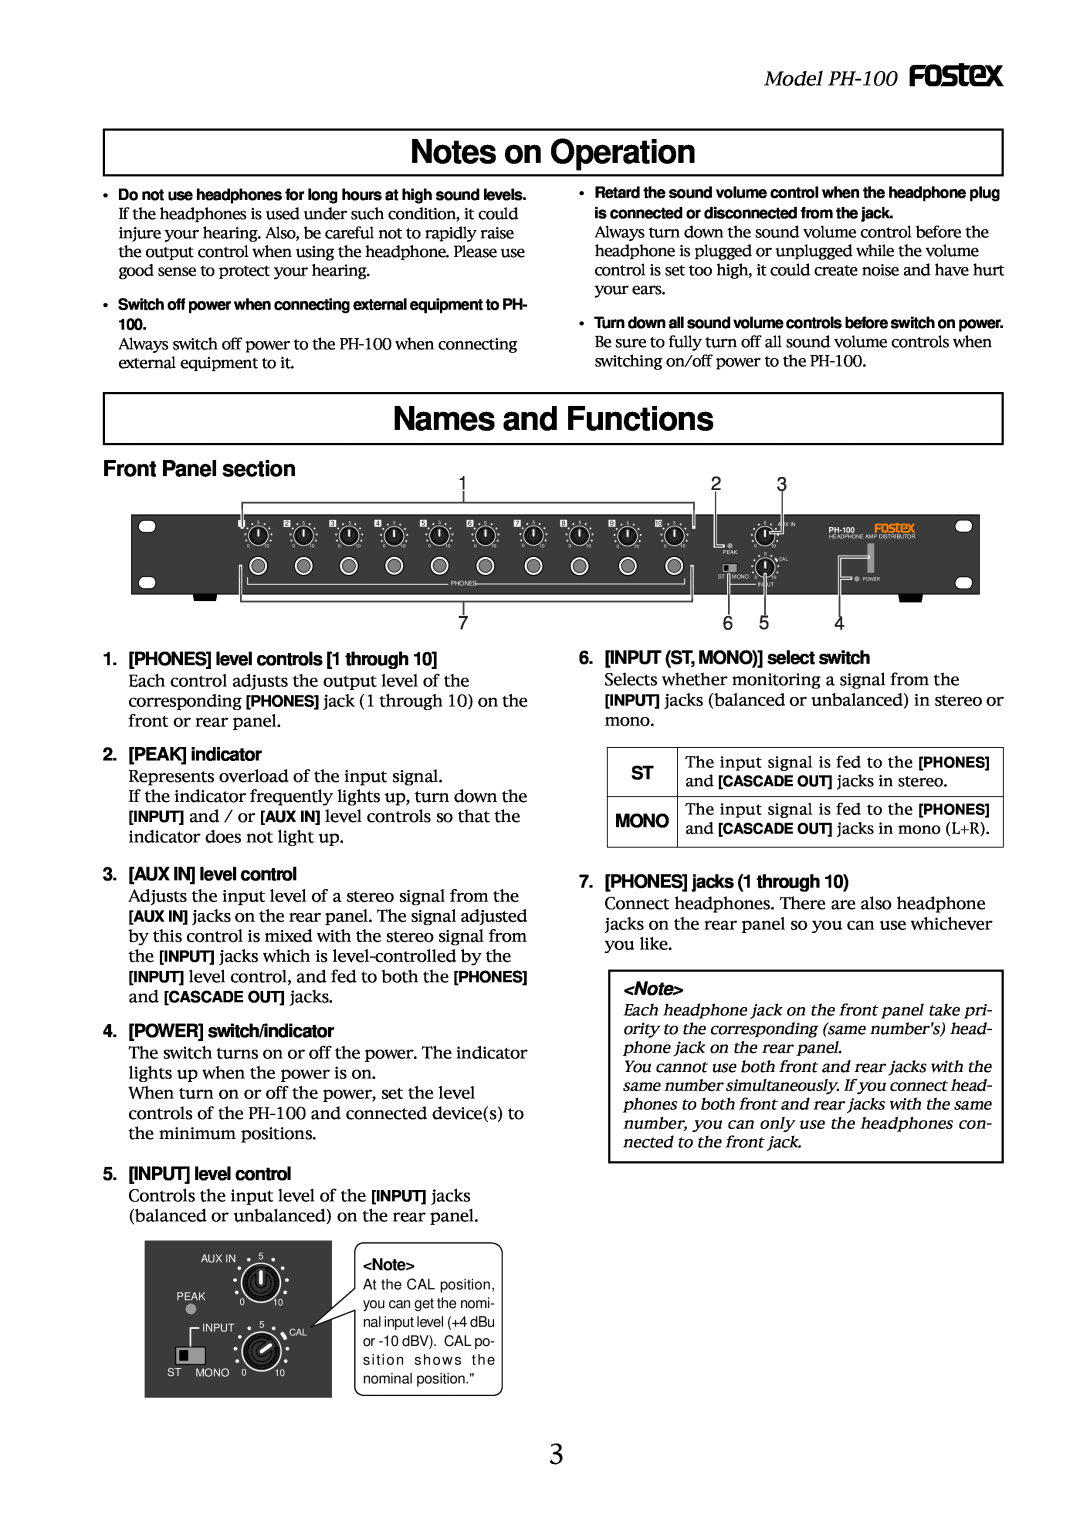 Fostex owner manual Notes on Operation, Names and Functions, Front Panel section, Model PH-100 